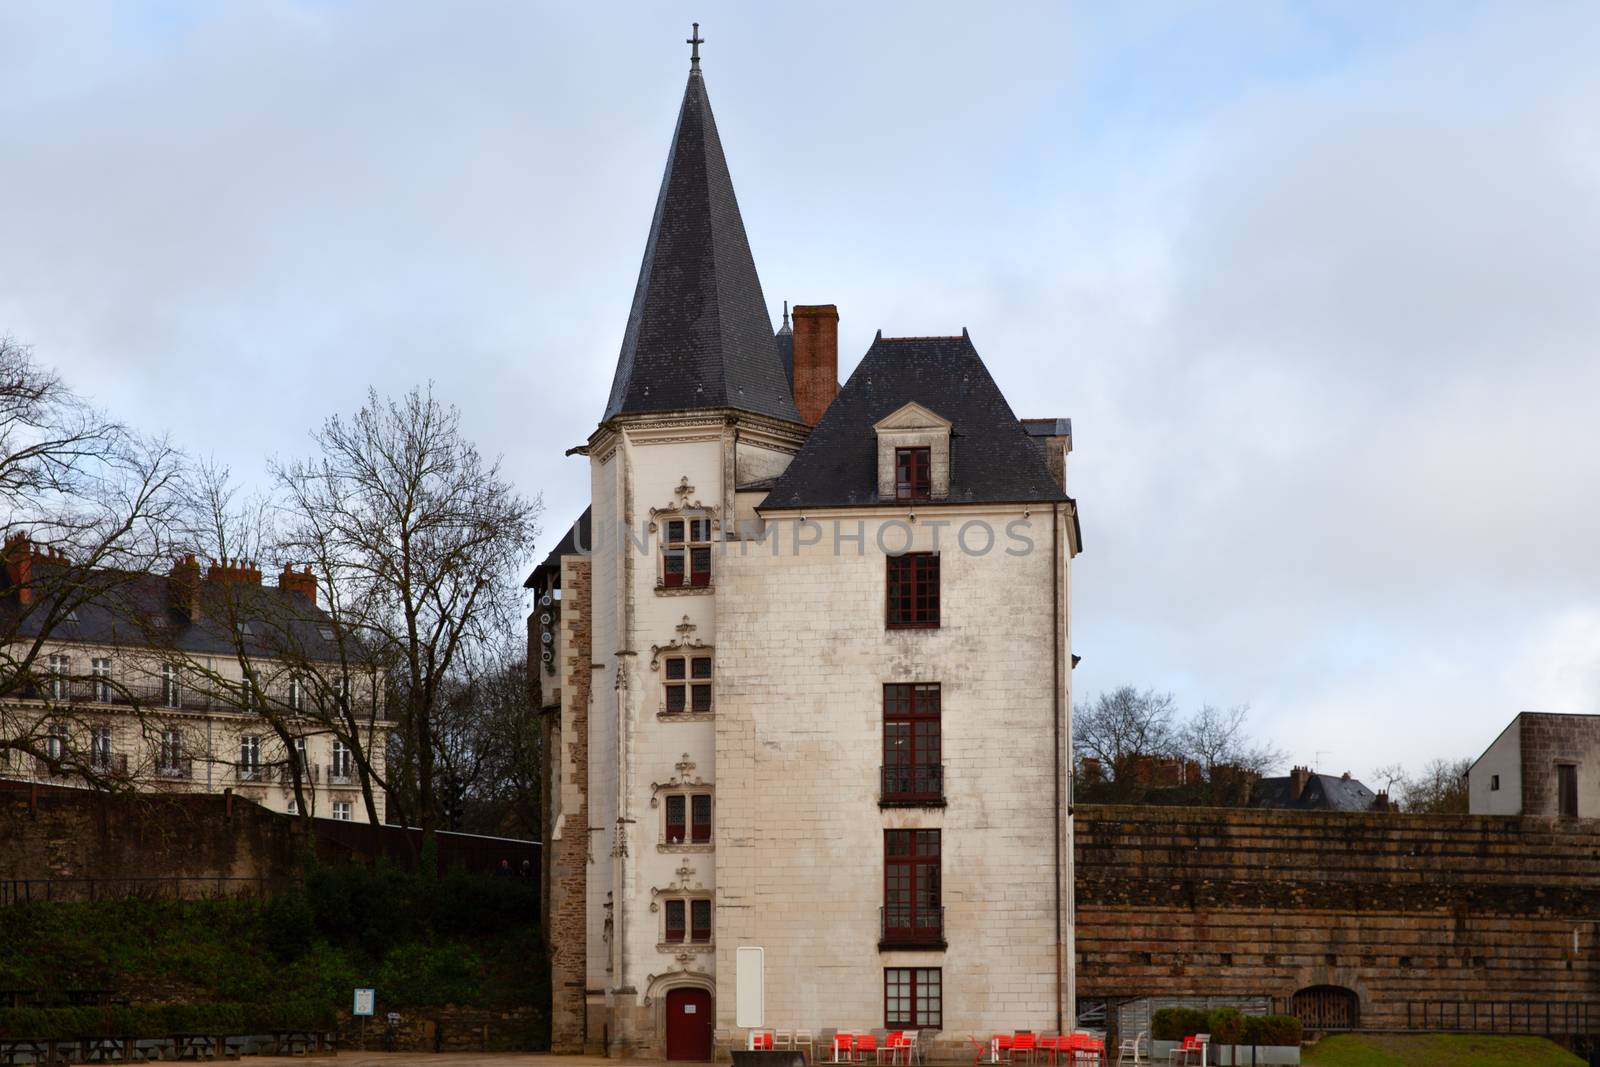 Nantes, France: 22 February 2020: Courtyard Castle of the Dukes of Brittany